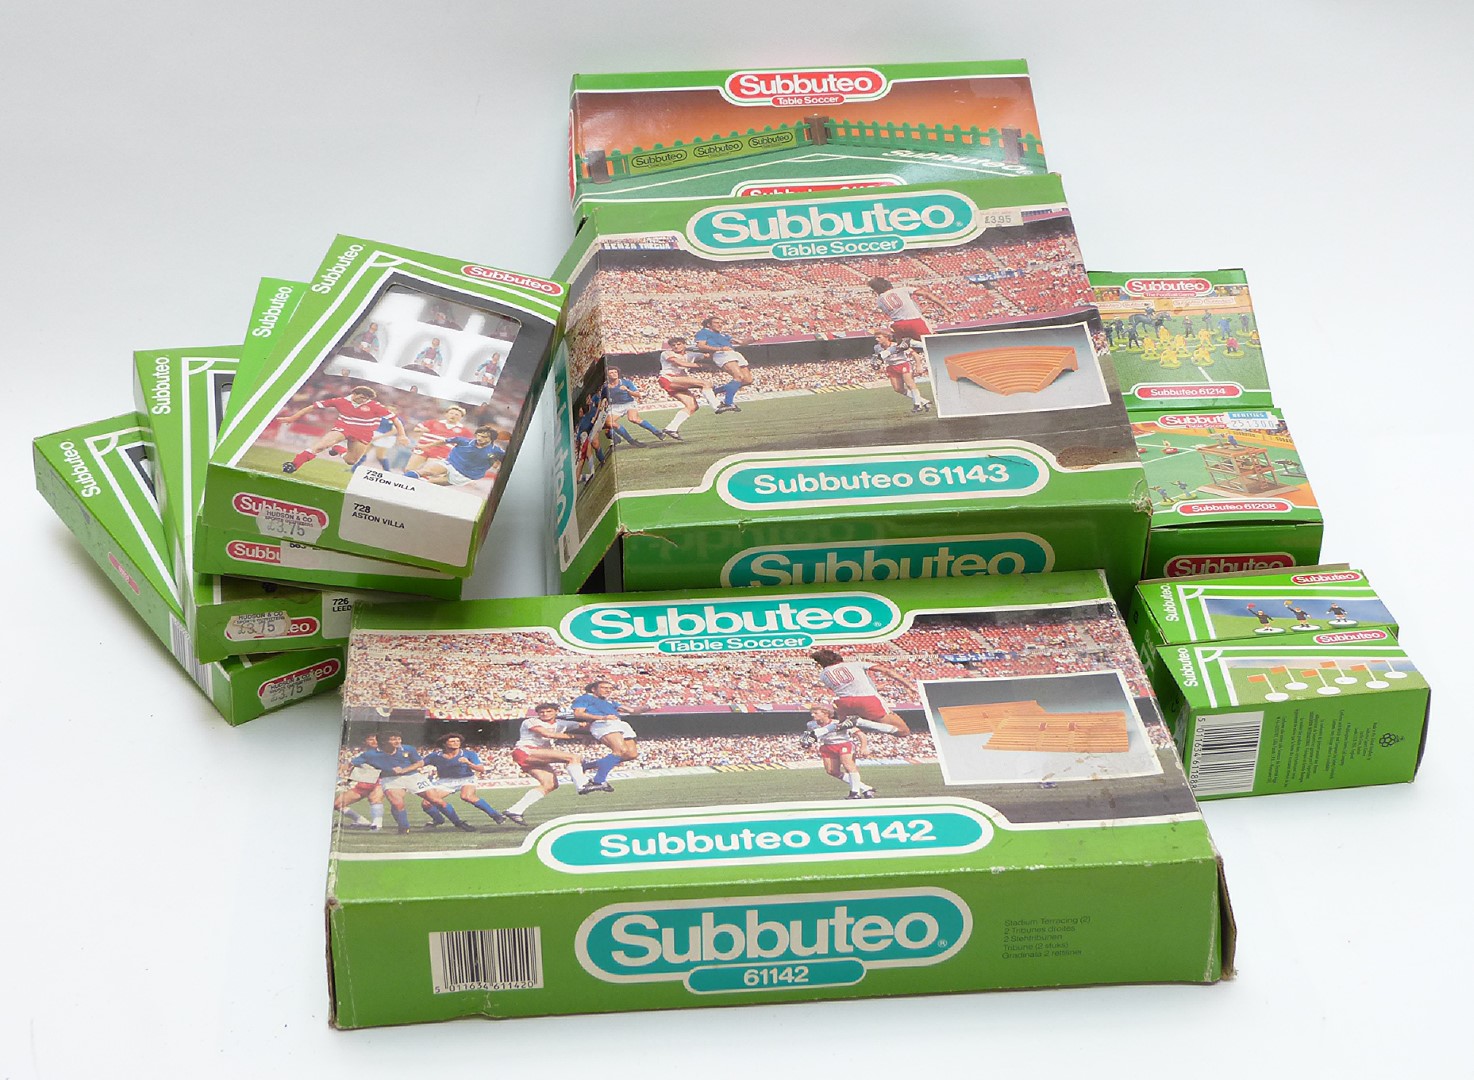 Eleven Subbuteo table soccer teams and accessories including Liverpool, Manchester City, Leeds